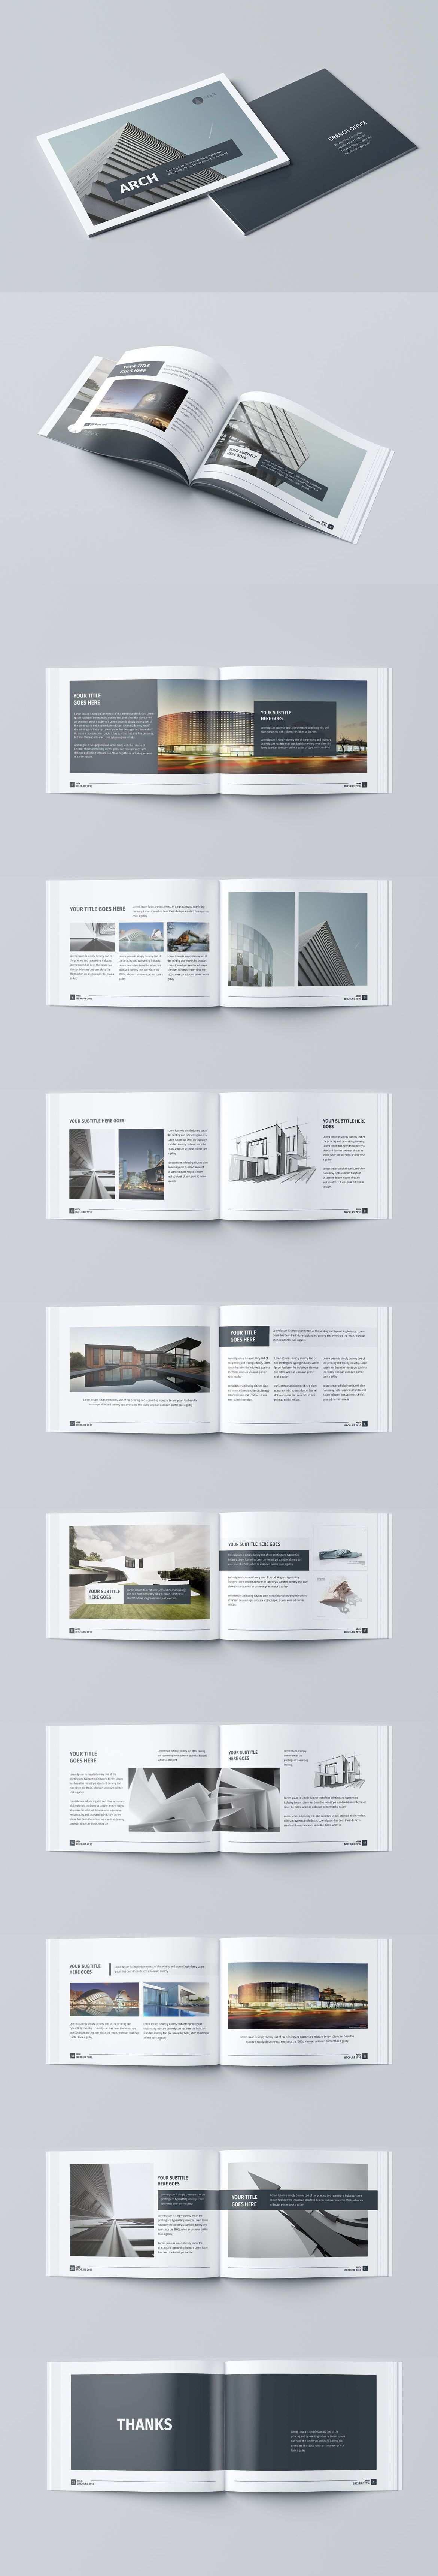 Modern Architecture Brochure 24 Pages A4 A5 Template Indesign Indd Architecture Brochures Layout Architecture Booklet Design